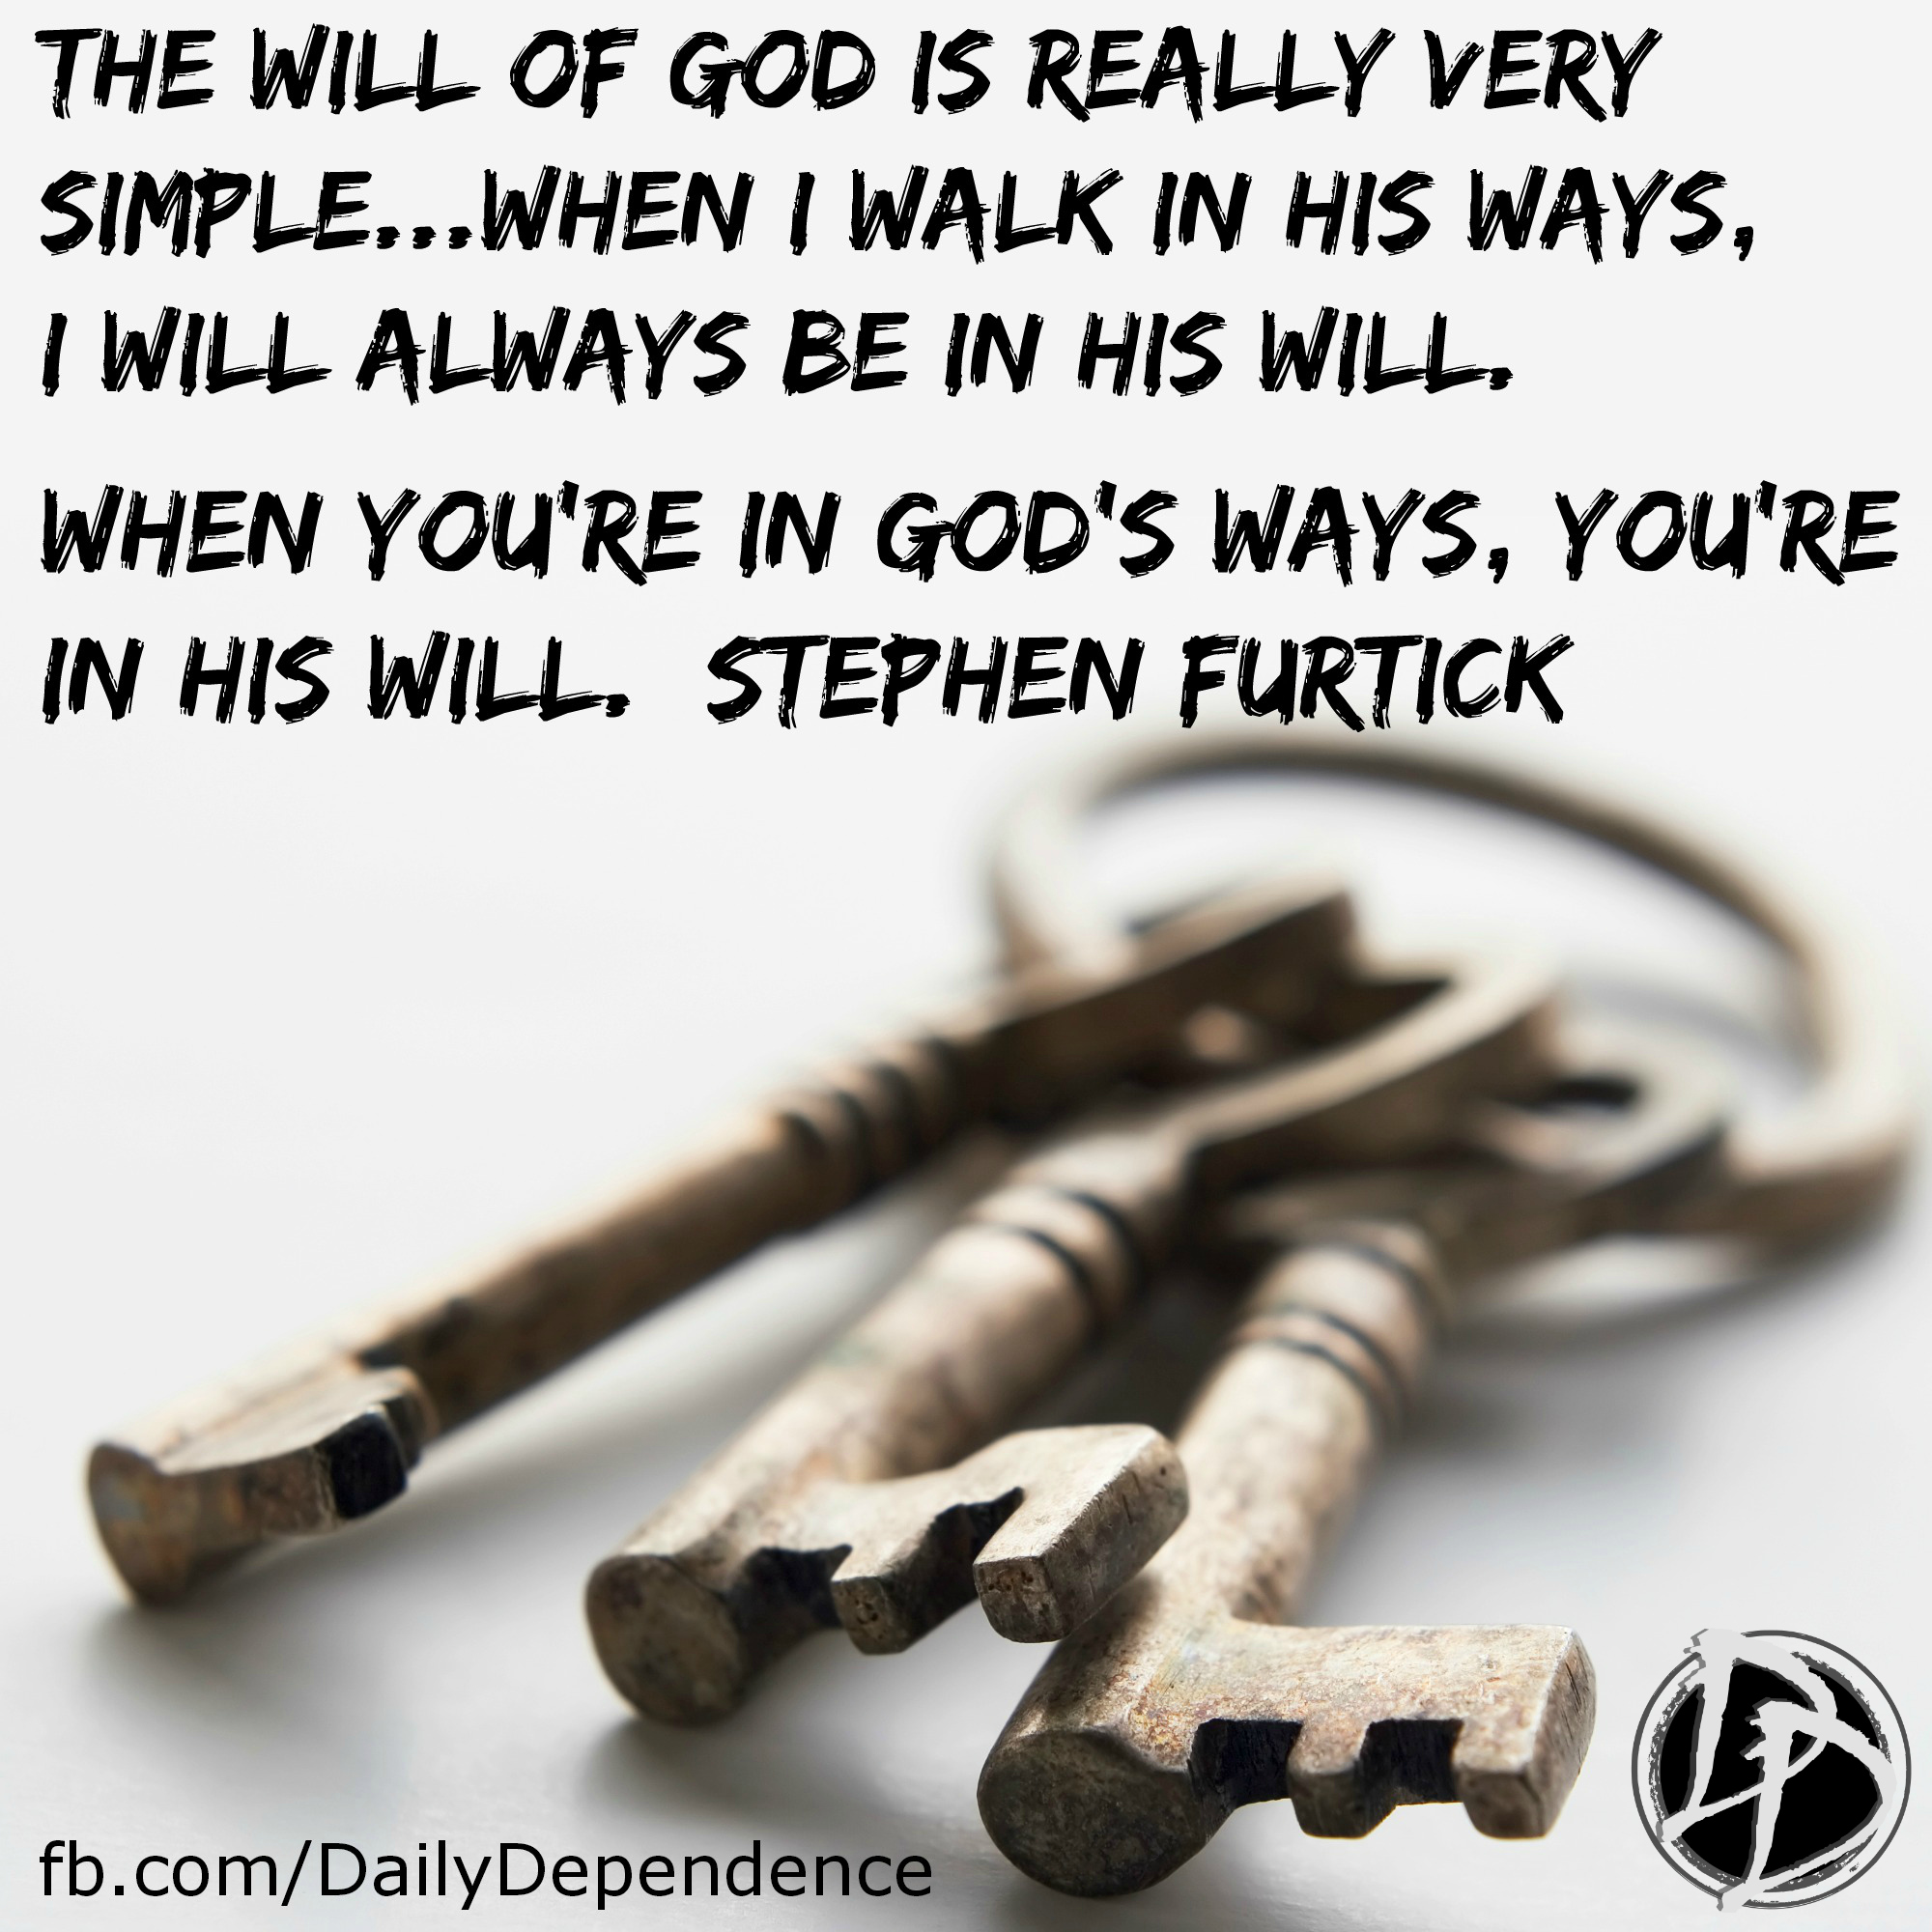 https://dailydependence.files.wordpress.com/2014/10/52-daily-dependence-stephen-furtick-the-will-of-god1.jpg